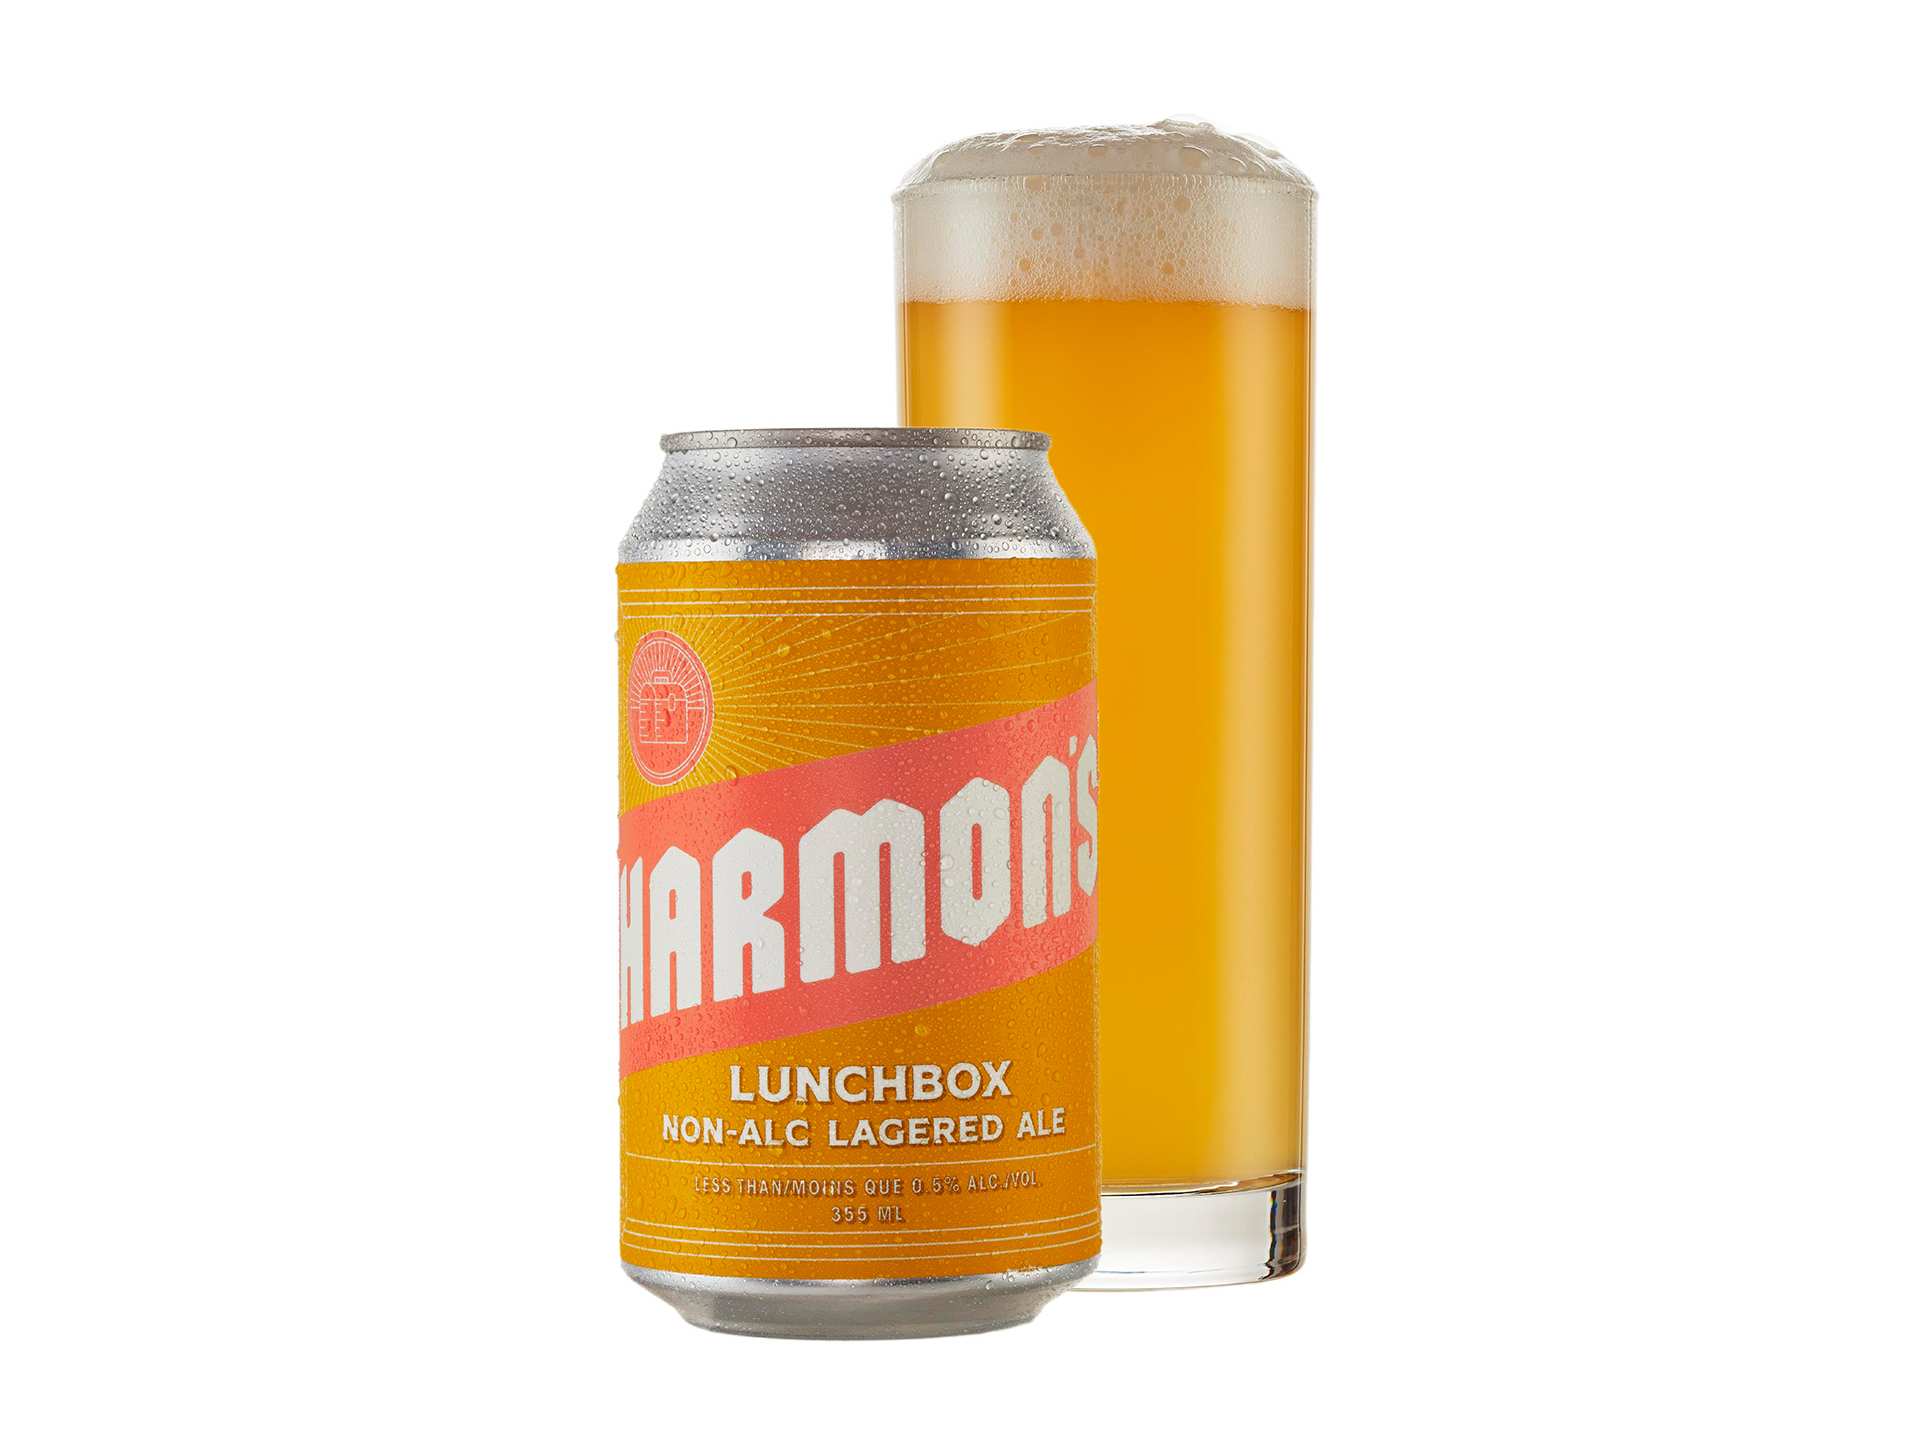 Non-alcoholic wine and non-alcoholic beer | Lunchbox non-alcoholic pale ale